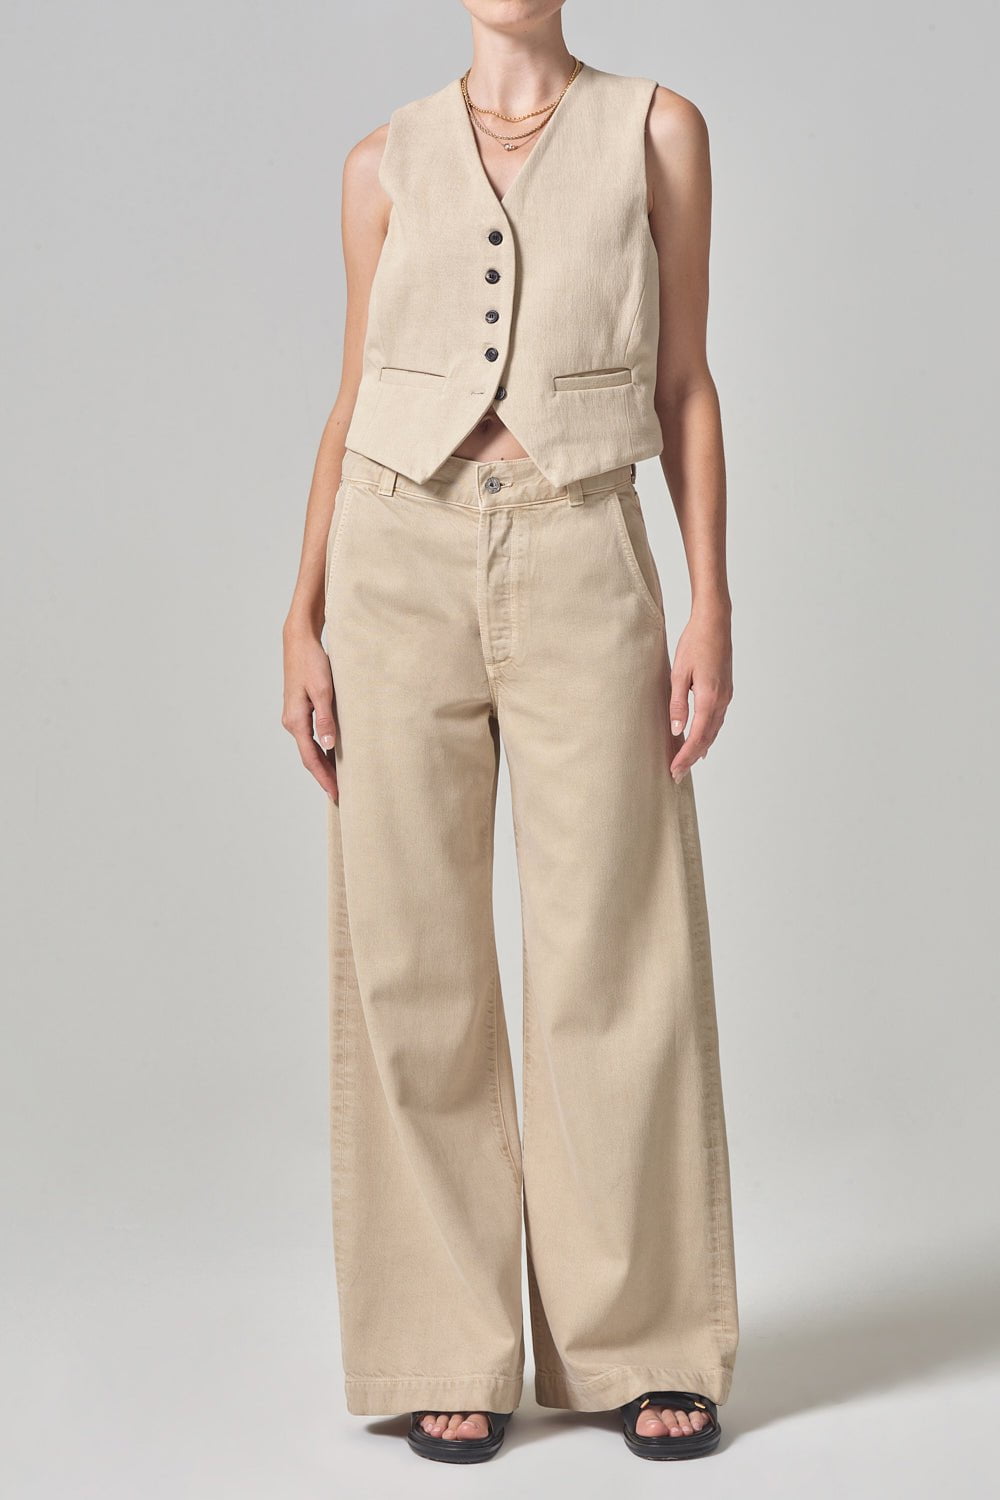 CITIZENS of HUMANITY-Beverly Trouser-